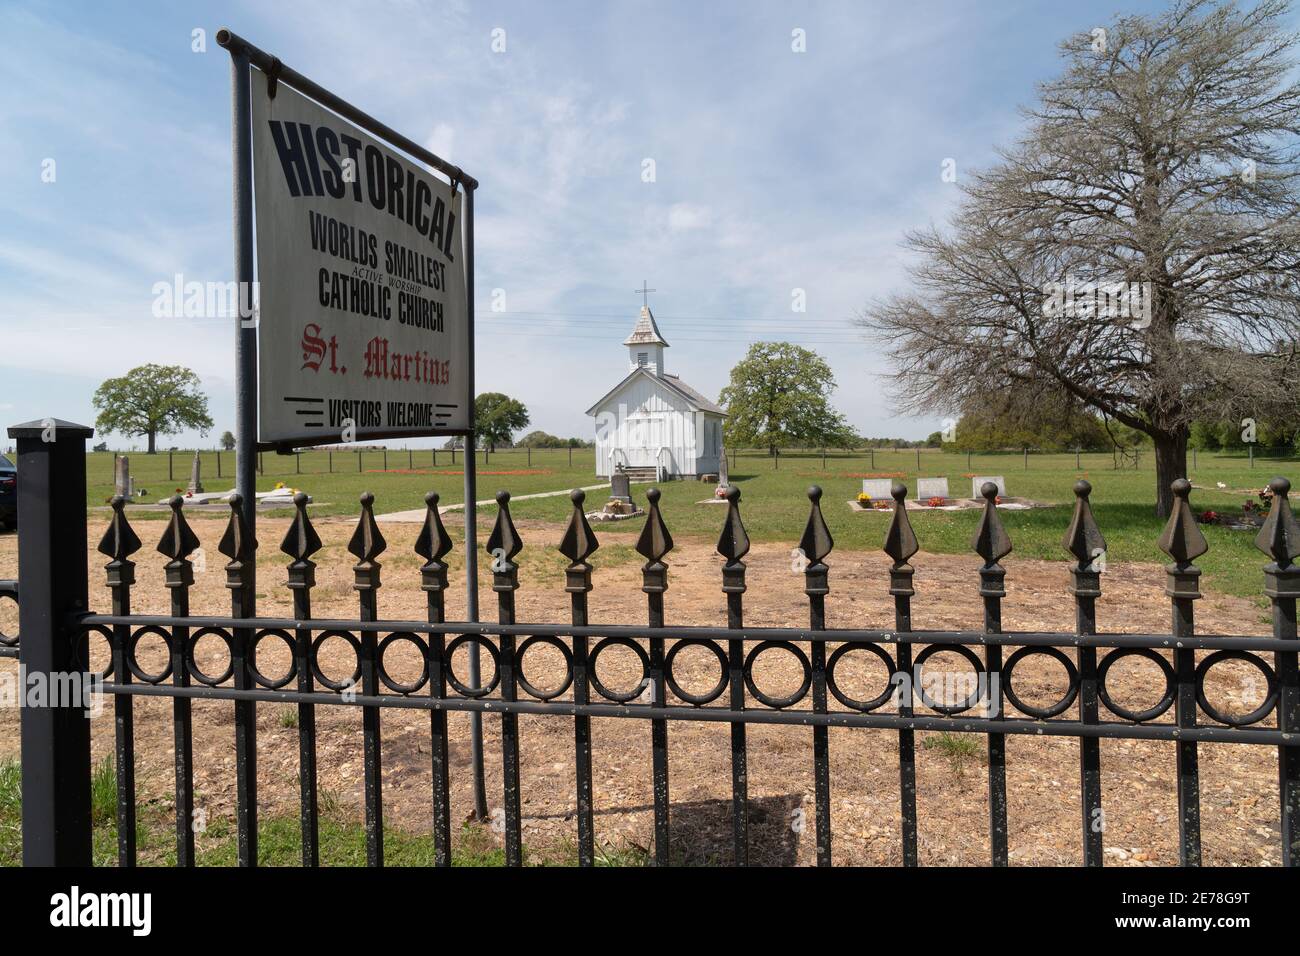 St. Martins Church Roadside View in Round Top Texas Foto Stock